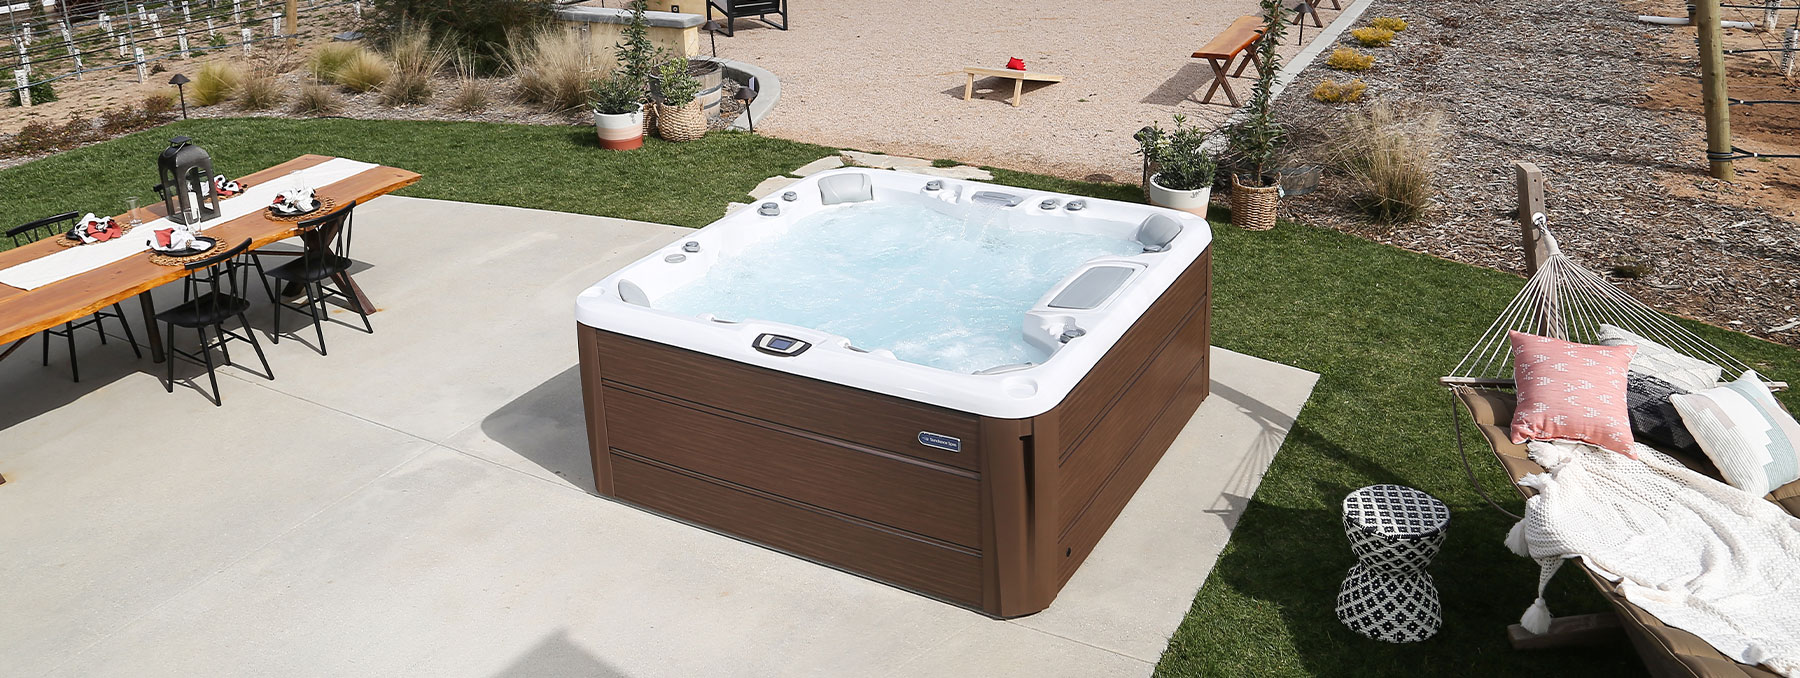 Can I put my hot tub inside or outside?